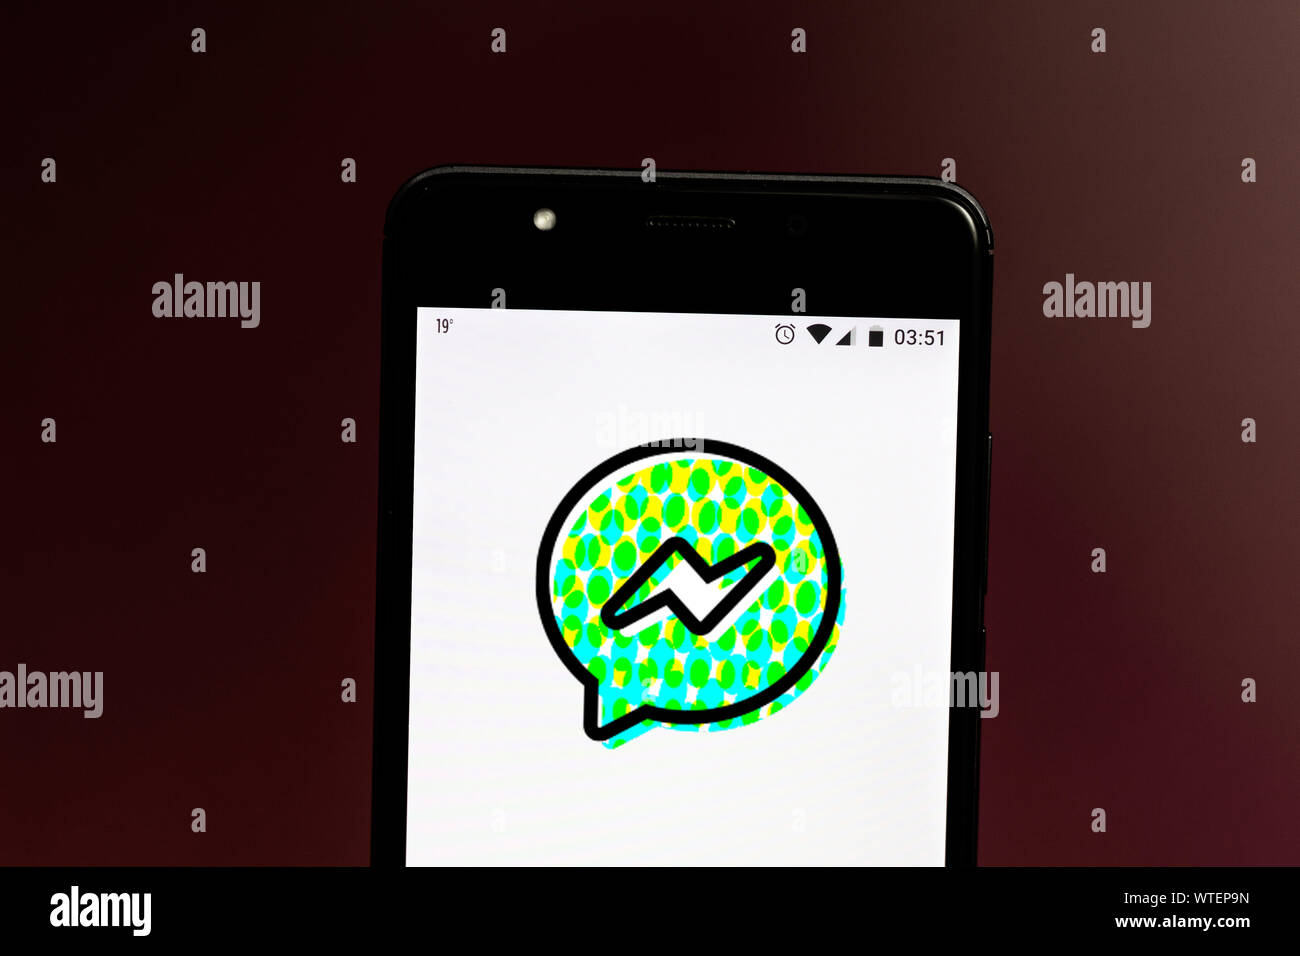 https://c8.alamy.com/comp/WTEP9N/brazil-24th-july-2019-in-this-photo-illustration-the-messenger-kids-logo-is-seen-displayed-on-a-smartphone-credit-rafael-henriquesopa-imageszuma-wirealamy-live-news-WTEP9N.jpg